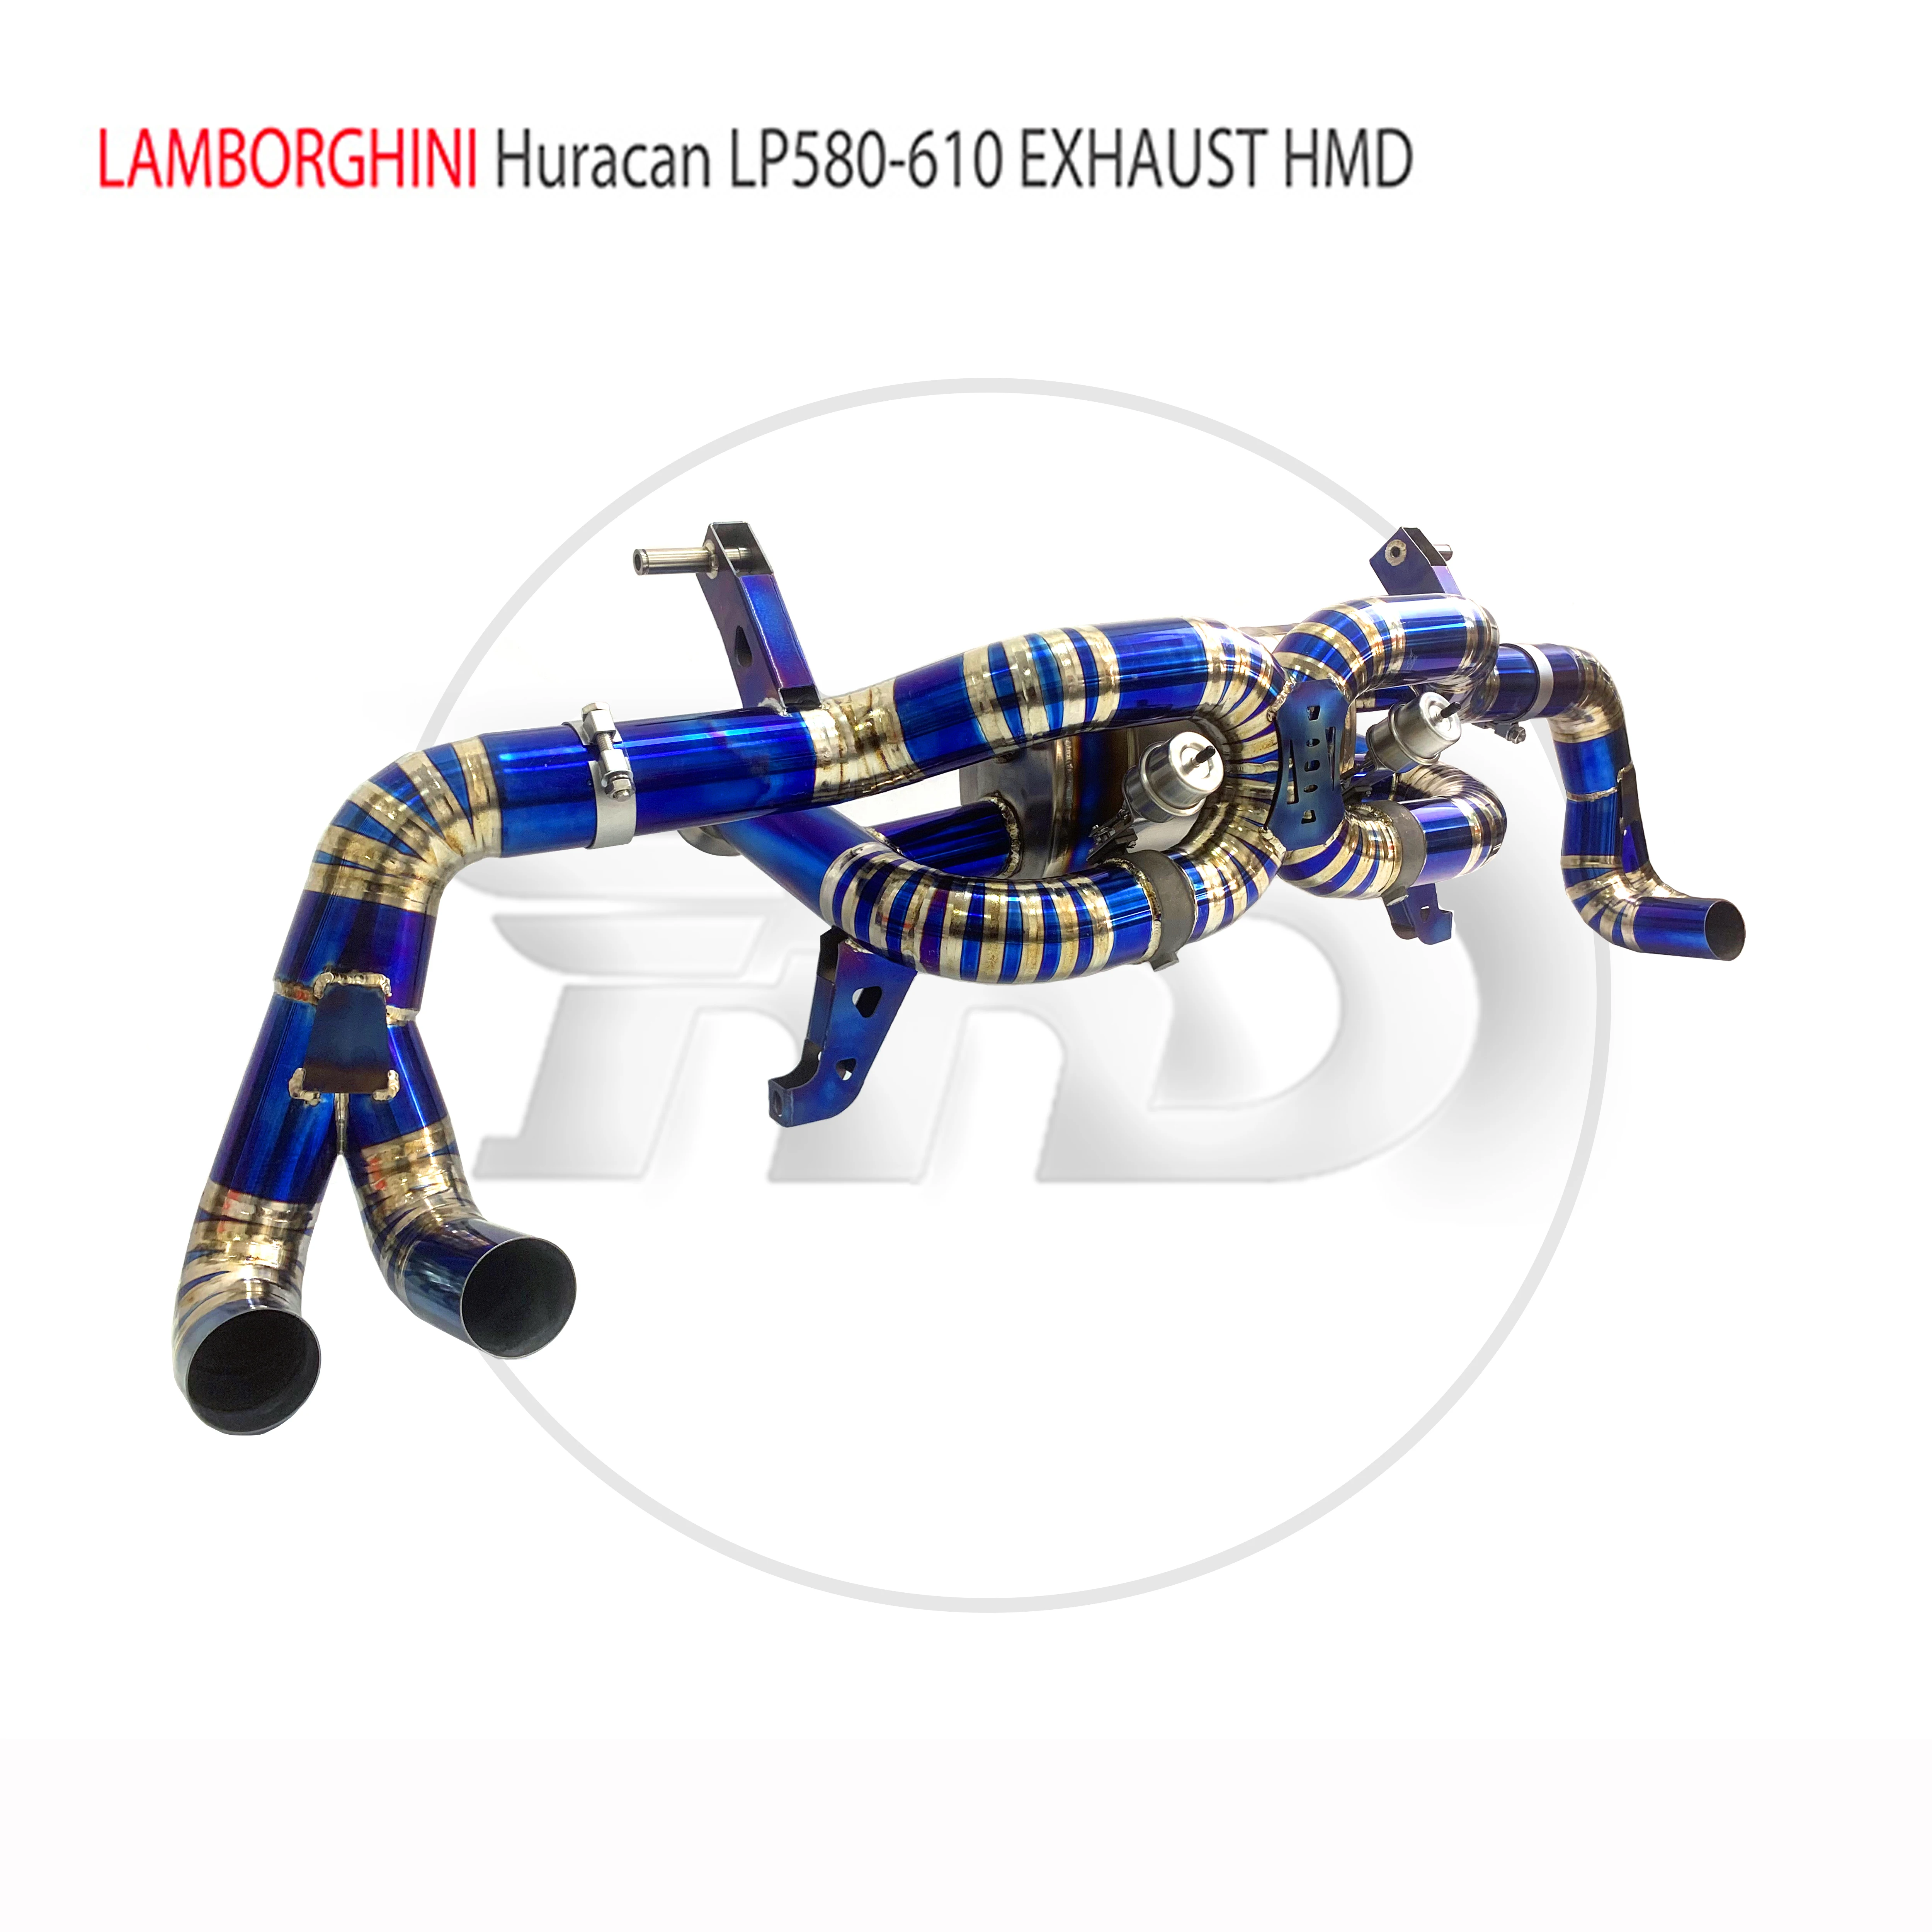 

HMD Titanium Alloy Exhaust Manifold Downpipe is Suitable For Lamborghini Huracan LP580-LP610 Muffler With Valve For Cars